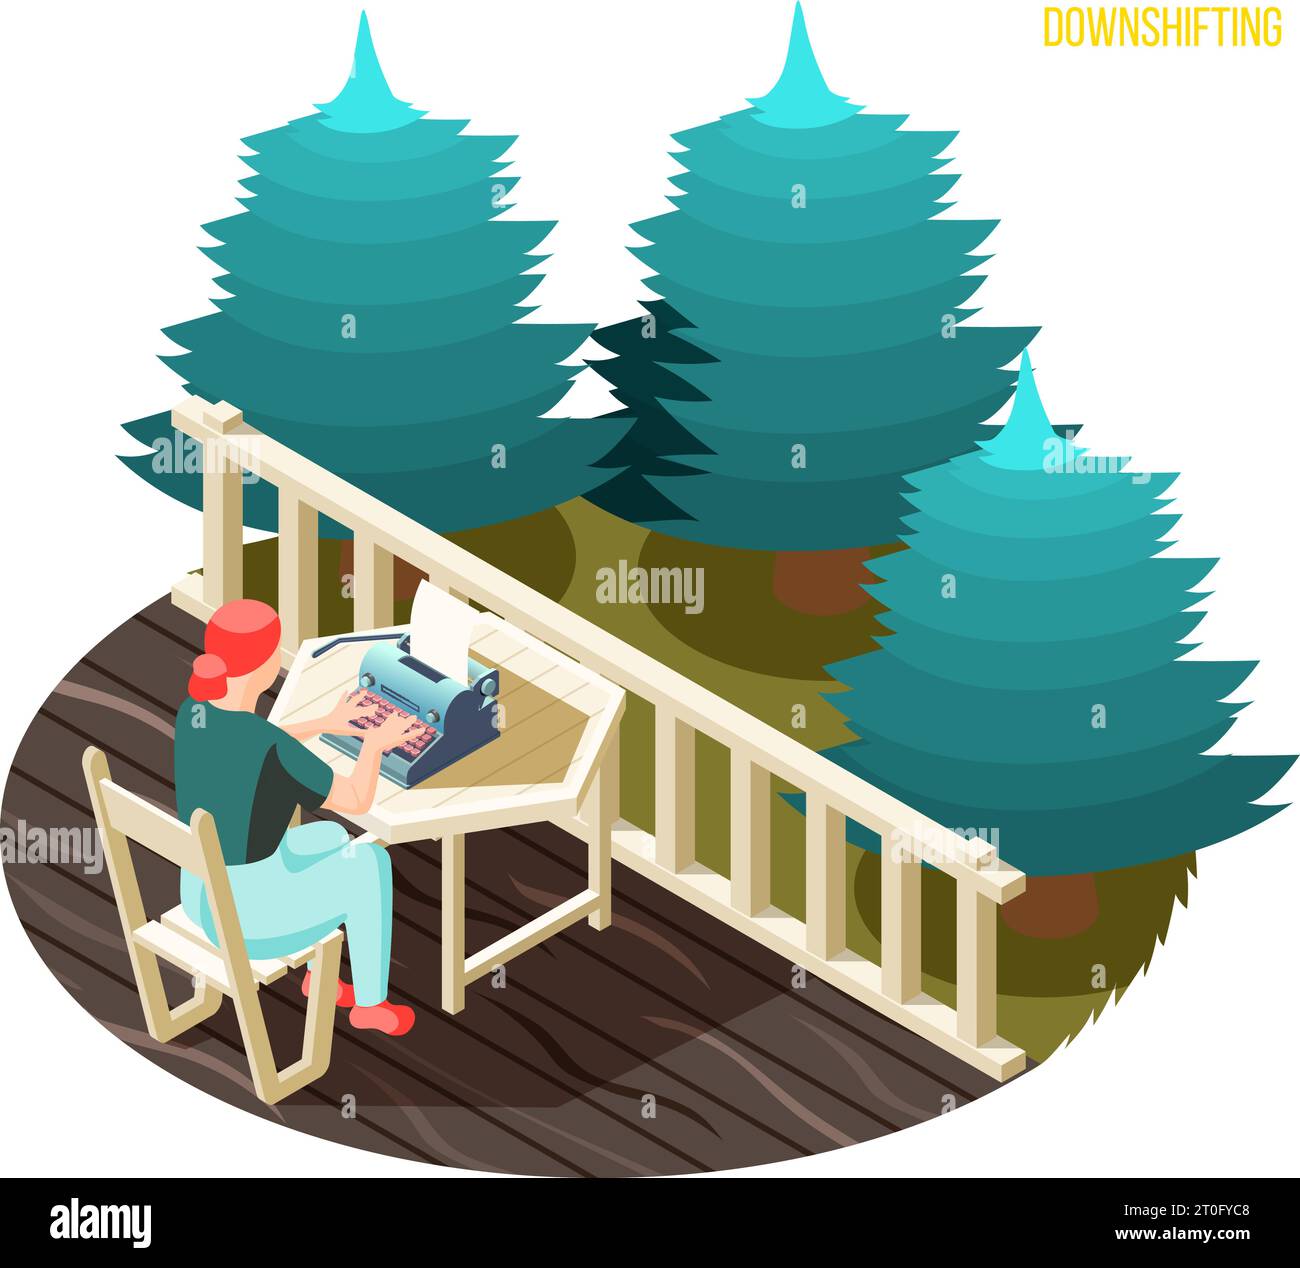 Downshifting work stress escaping people isometric composition with freelance writer typing on balcony in countryside vector illustration Stock Vector